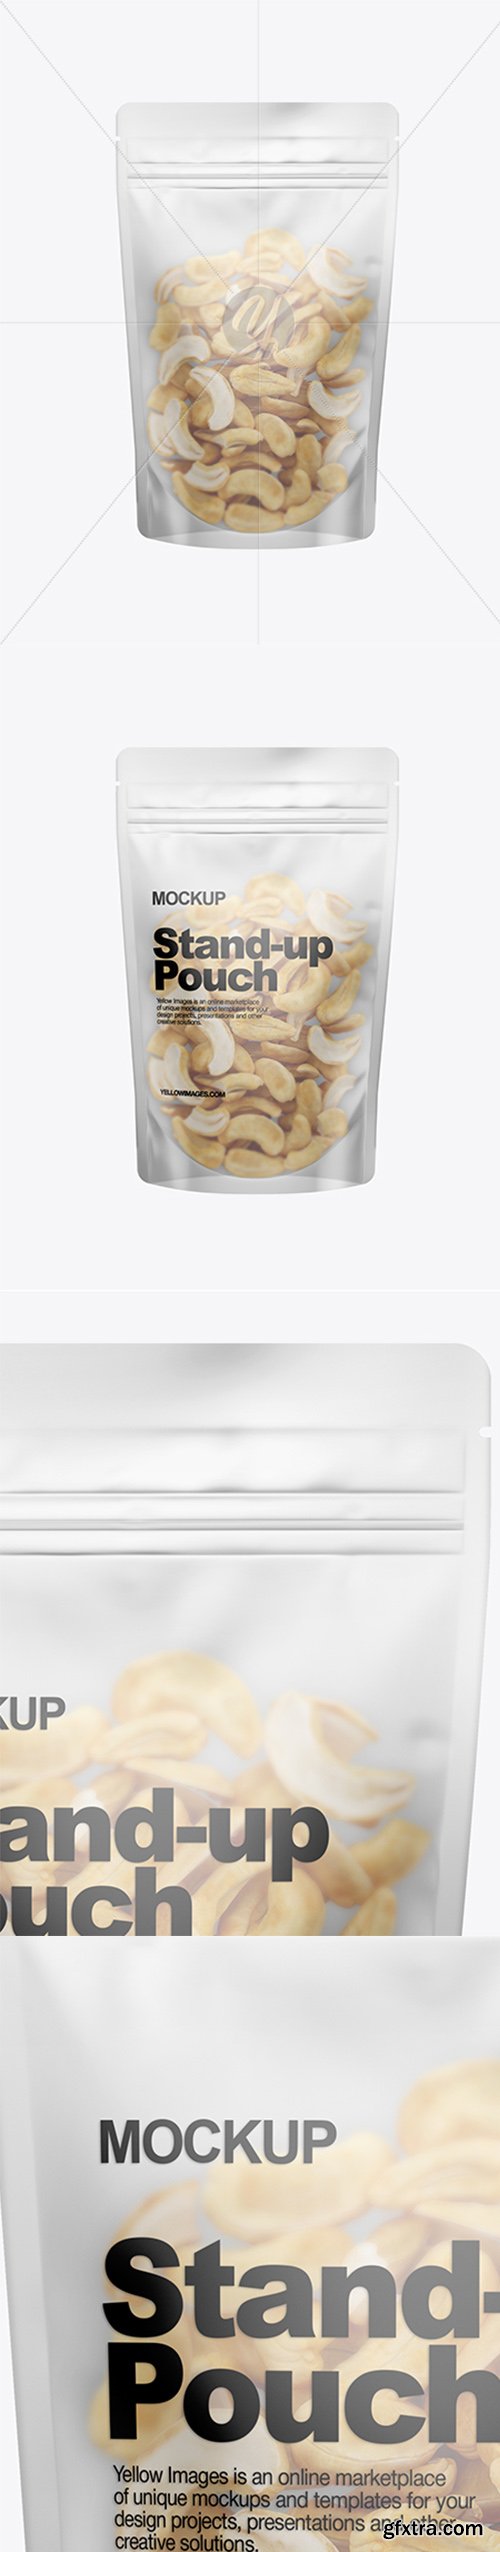 Frosted Stand-Up Pouch W/ Cashew Nuts Mockup 36114